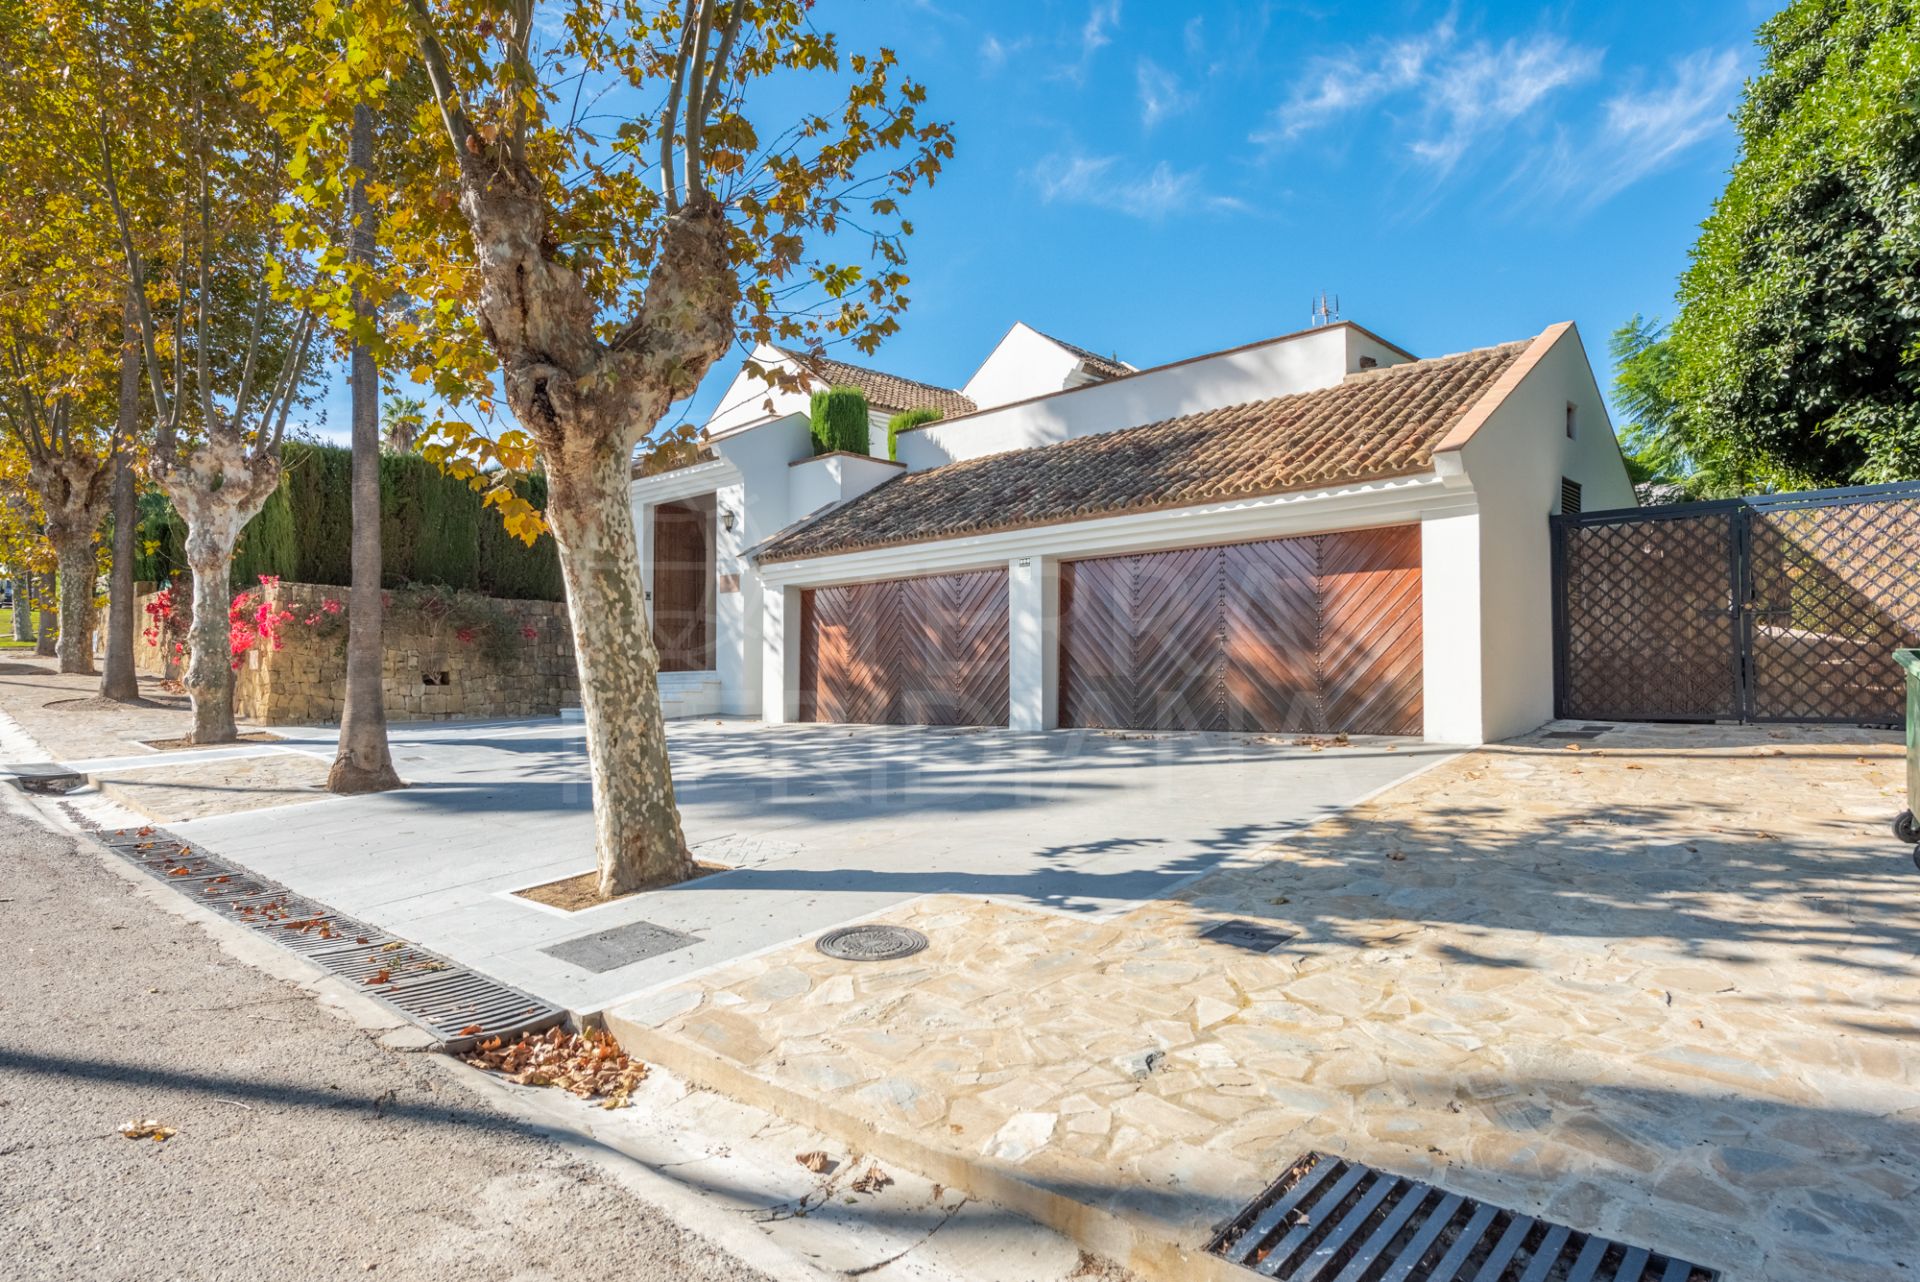 Spacious and stylish villa for sale in the sought after neighbourhood of Kings & Queens, Sotogrande